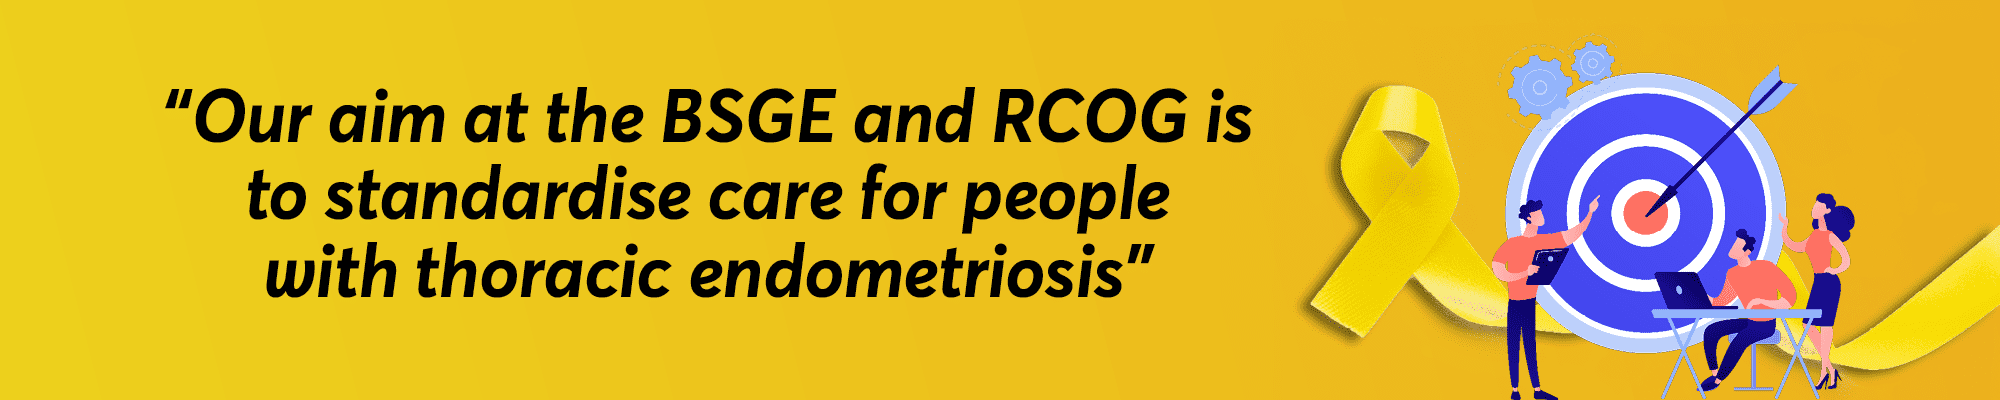 BSGE and RCOG Joint Statement on Thoracic Endometriosis Care